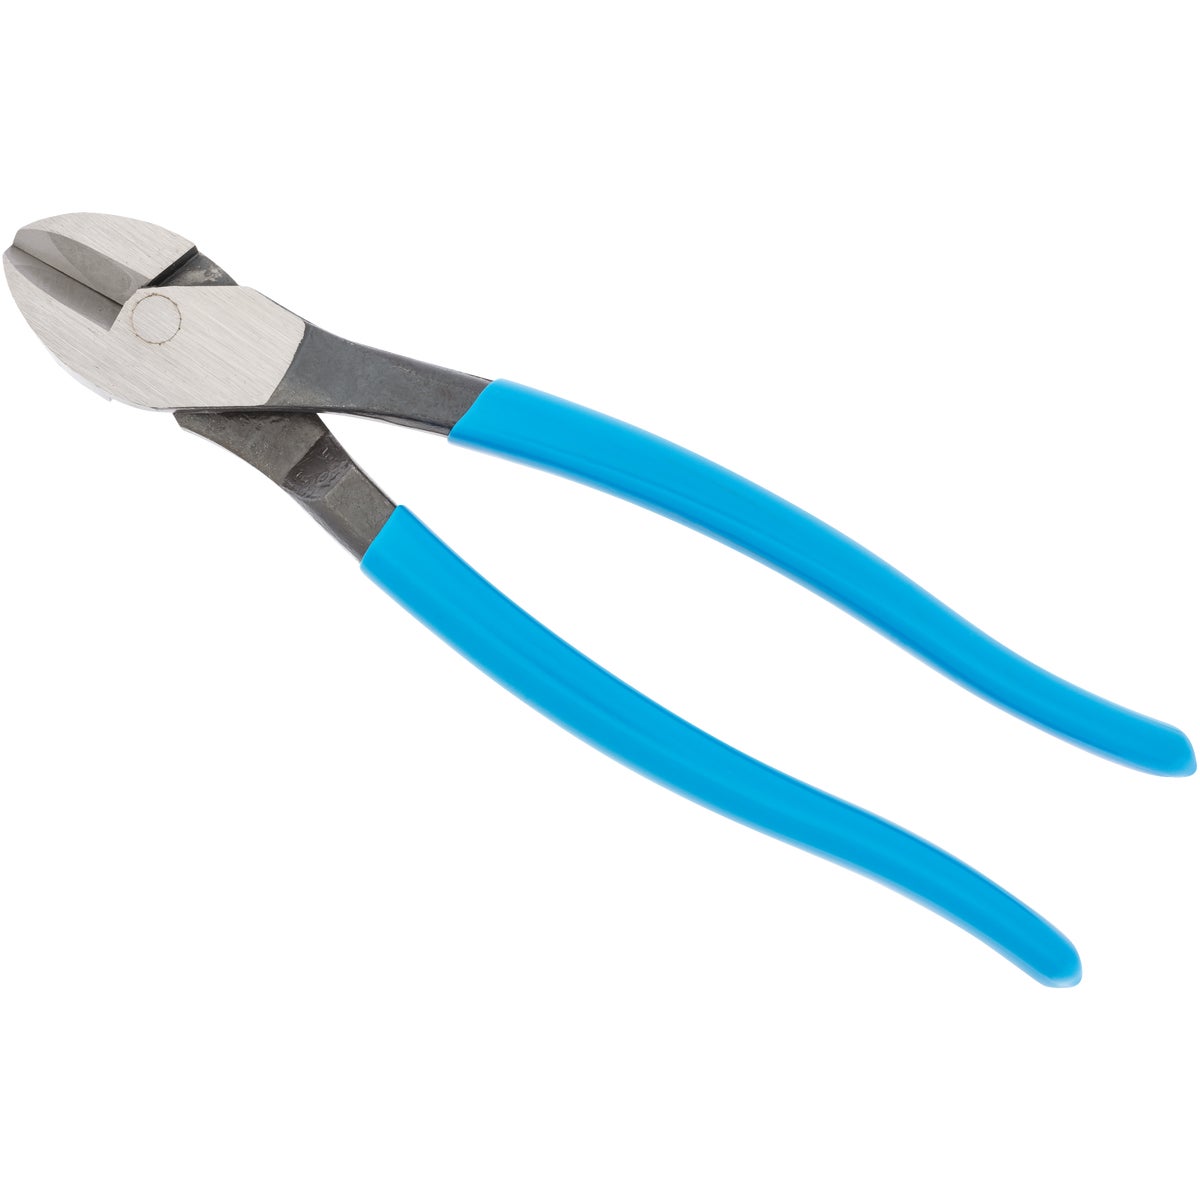 Item 301381, Channellock center cut plier maximizes cutting power with less force.